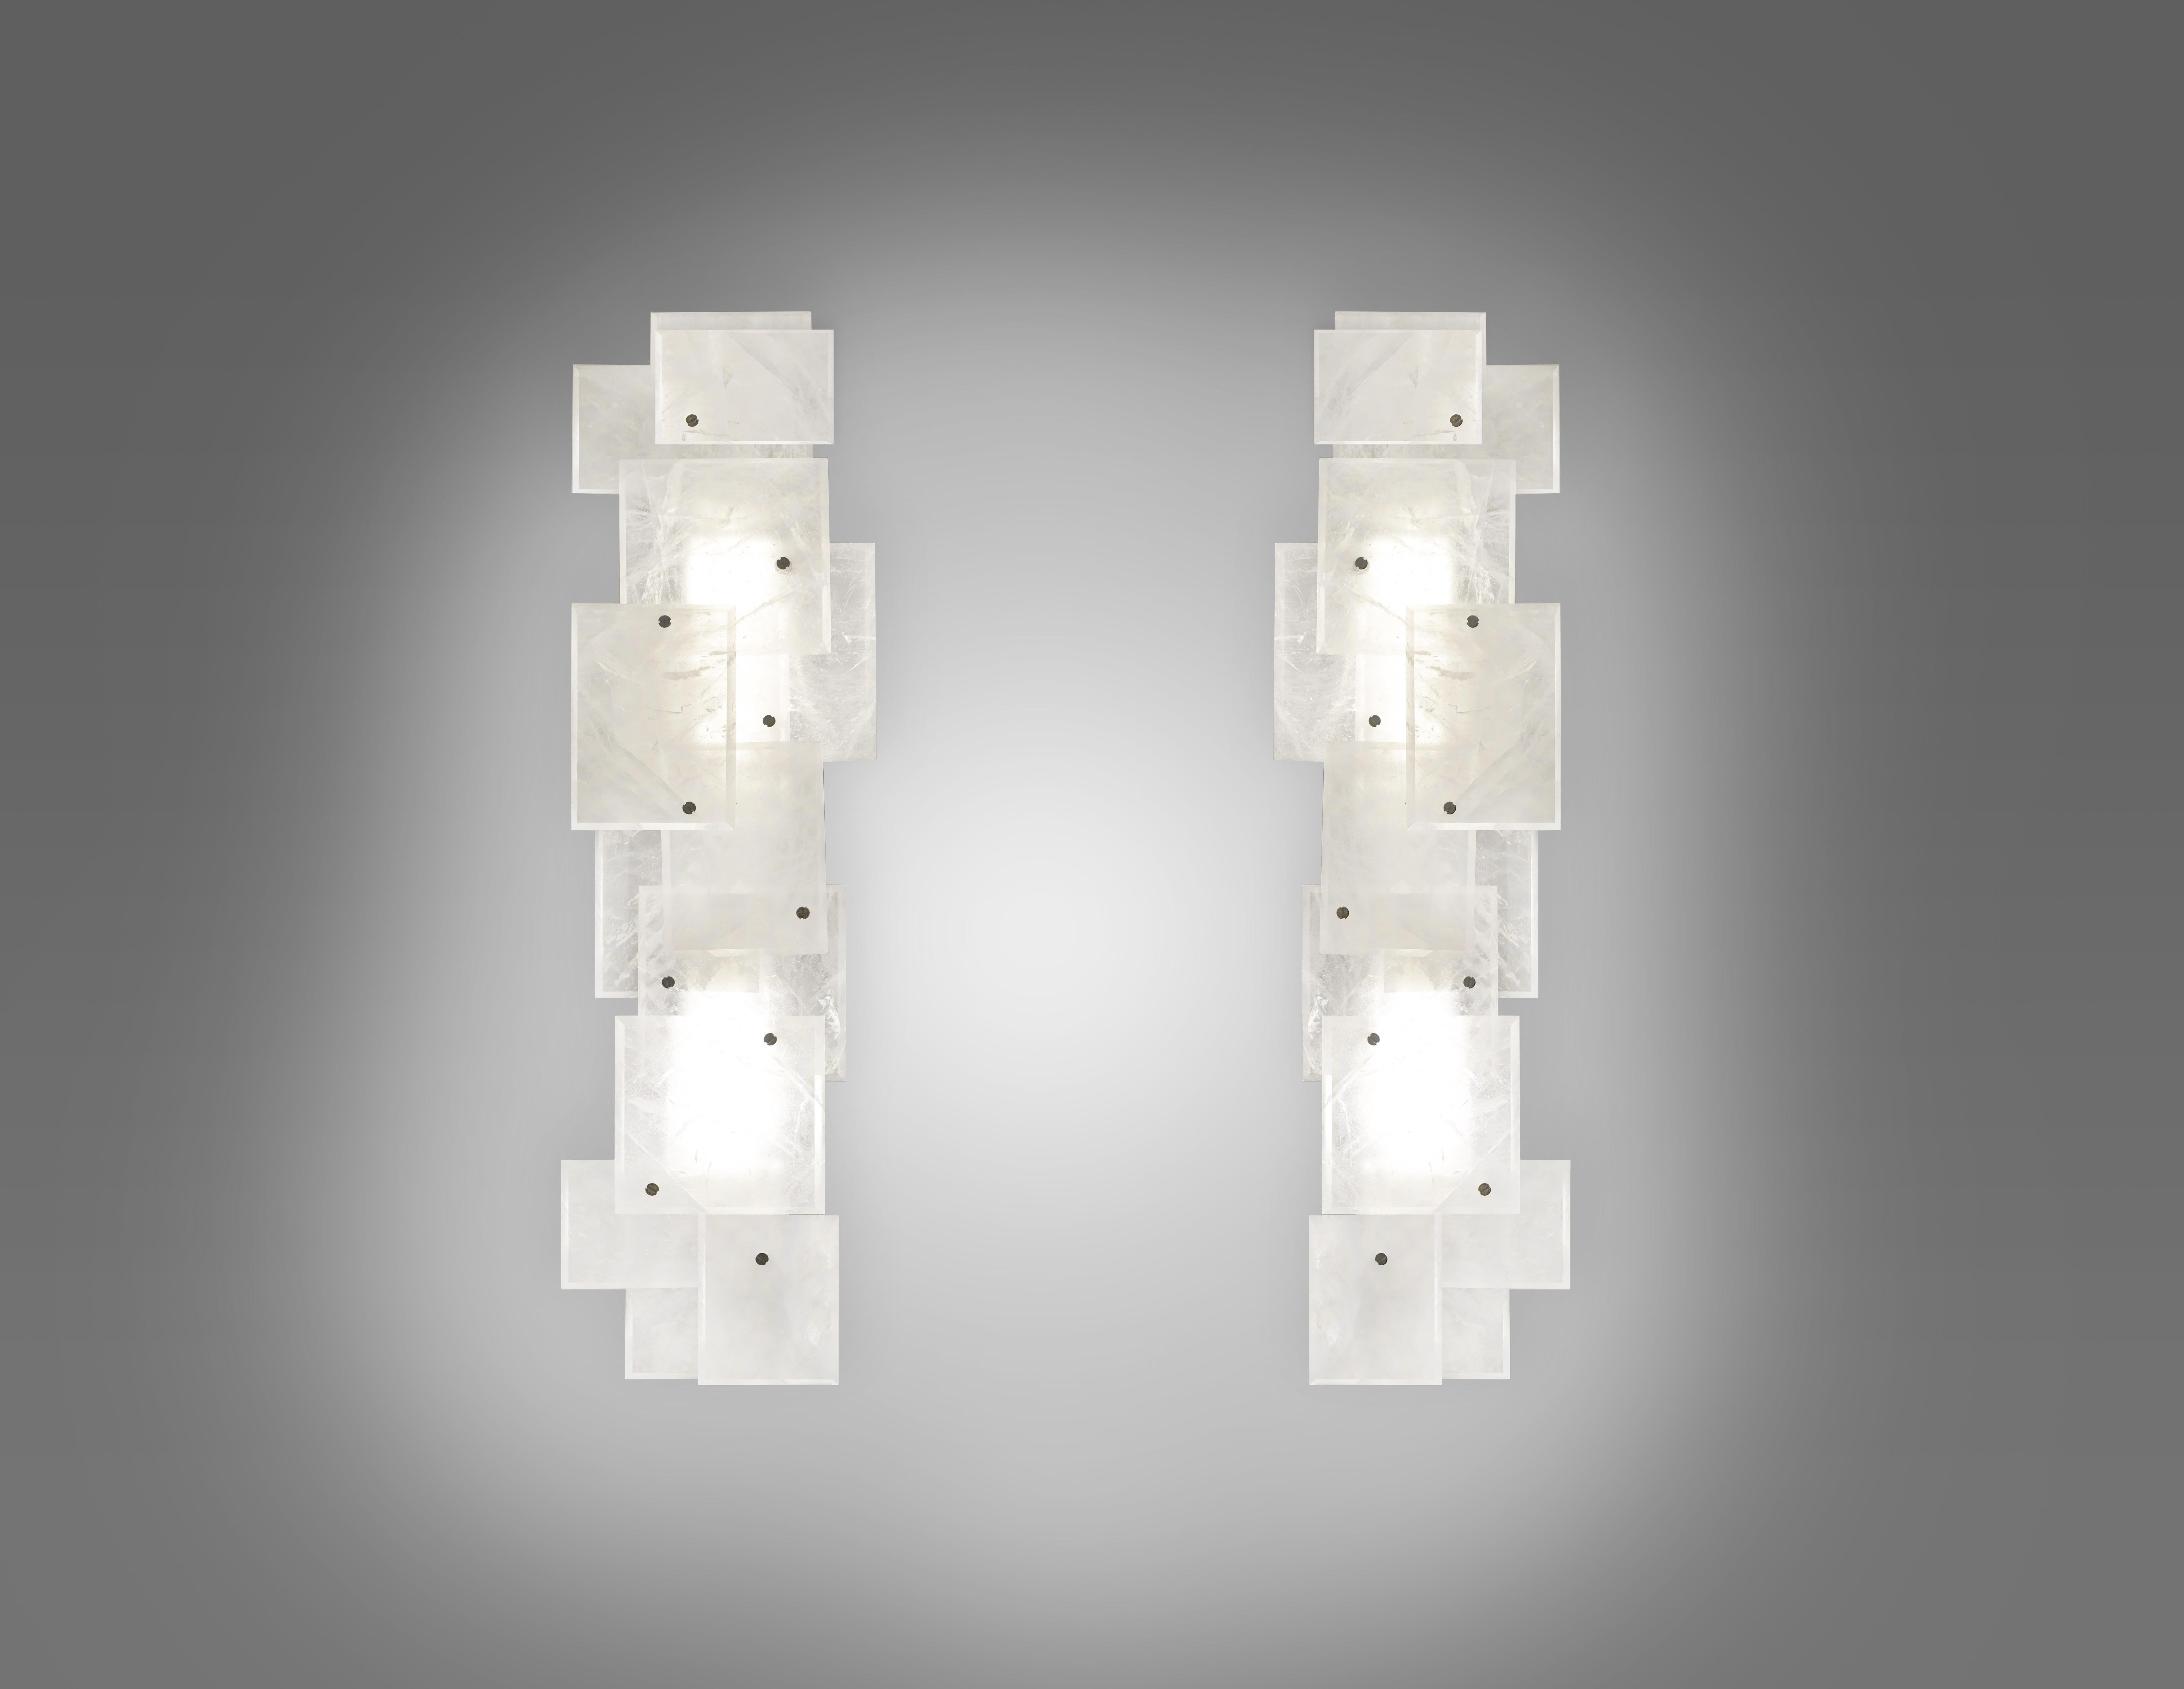 Single modern rock crystal quartz sconces with multiple panels decorations in matt nickel finish. Created by Phoenix Gallery.
Each sconce has two sockets, use LED, long tube, warm lights.
Four 60 watts LED, warm lights are included.